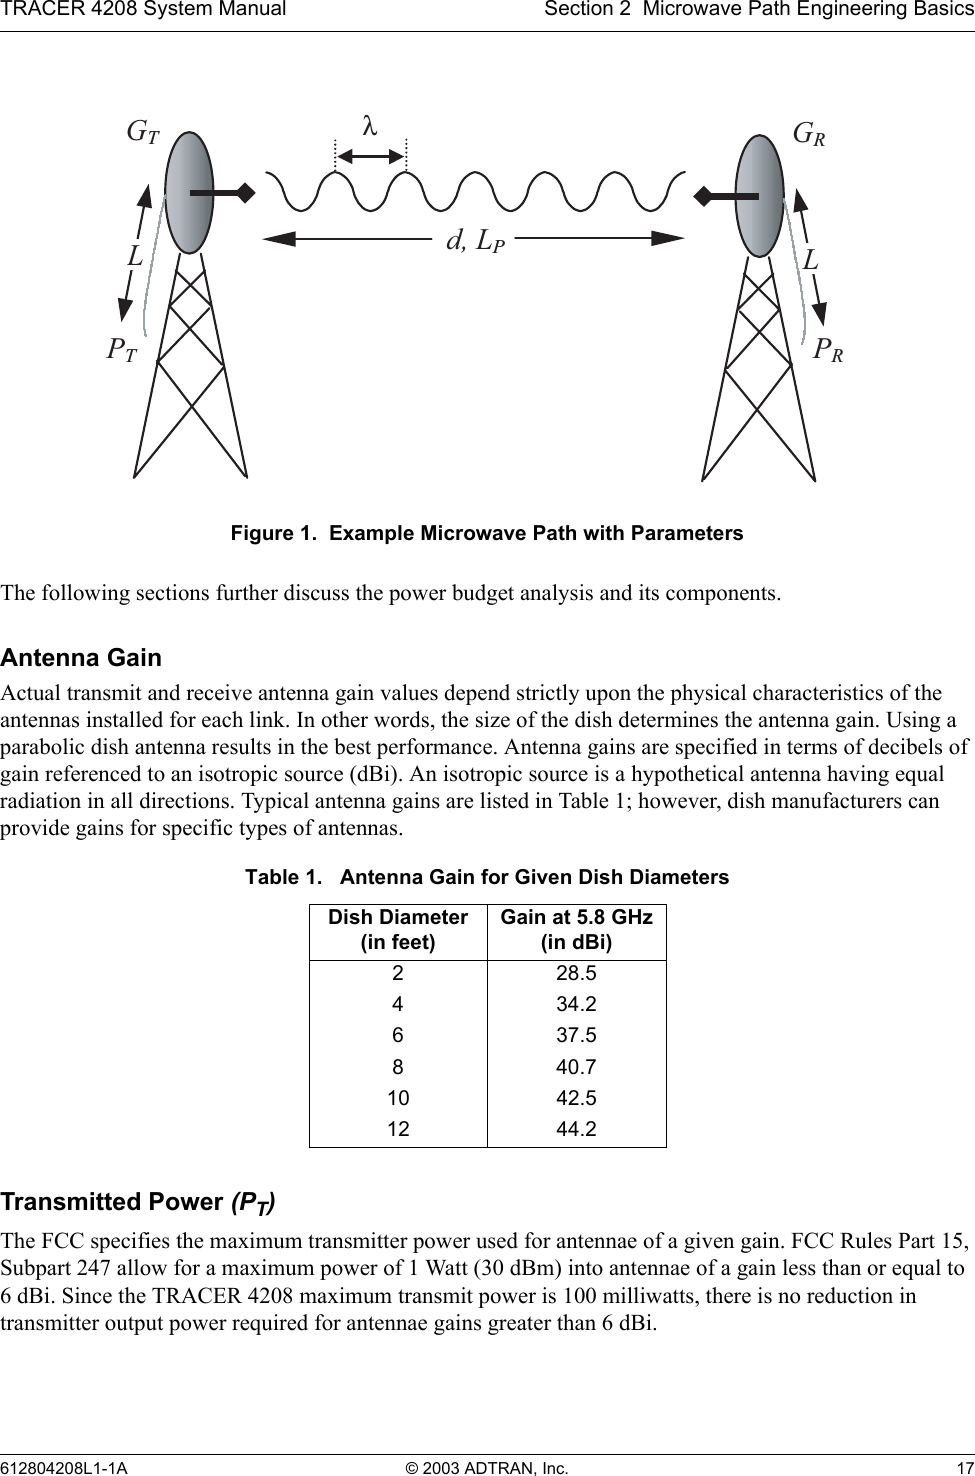 TRACER 4208 System Manual Section 2  Microwave Path Engineering Basics612804208L1-1A © 2003 ADTRAN, Inc. 17Figure 1.  Example Microwave Path with ParametersThe following sections further discuss the power budget analysis and its components.Antenna GainActual transmit and receive antenna gain values depend strictly upon the physical characteristics of the antennas installed for each link. In other words, the size of the dish determines the antenna gain. Using a parabolic dish antenna results in the best performance. Antenna gains are specified in terms of decibels of gain referenced to an isotropic source (dBi). An isotropic source is a hypothetical antenna having equal radiation in all directions. Typical antenna gains are listed in Table 1; however, dish manufacturers can provide gains for specific types of antennas.Transmitted Power (PT)The FCC specifies the maximum transmitter power used for antennae of a given gain. FCC Rules Part 15, Subpart 247 allow for a maximum power of 1 Watt (30 dBm) into antennae of a gain less than or equal to 6 dBi. Since the TRACER 4208 maximum transmit power is 100 milliwatts, there is no reduction in transmitter output power required for antennae gains greater than 6 dBi.Table 1.   Antenna Gain for Given Dish DiametersDish Diameter(in feet)Gain at 5.8 GHz(in dBi)228.5434.2637.5840.710 42.512 44.2 GTGRd, LPPTPRλLL